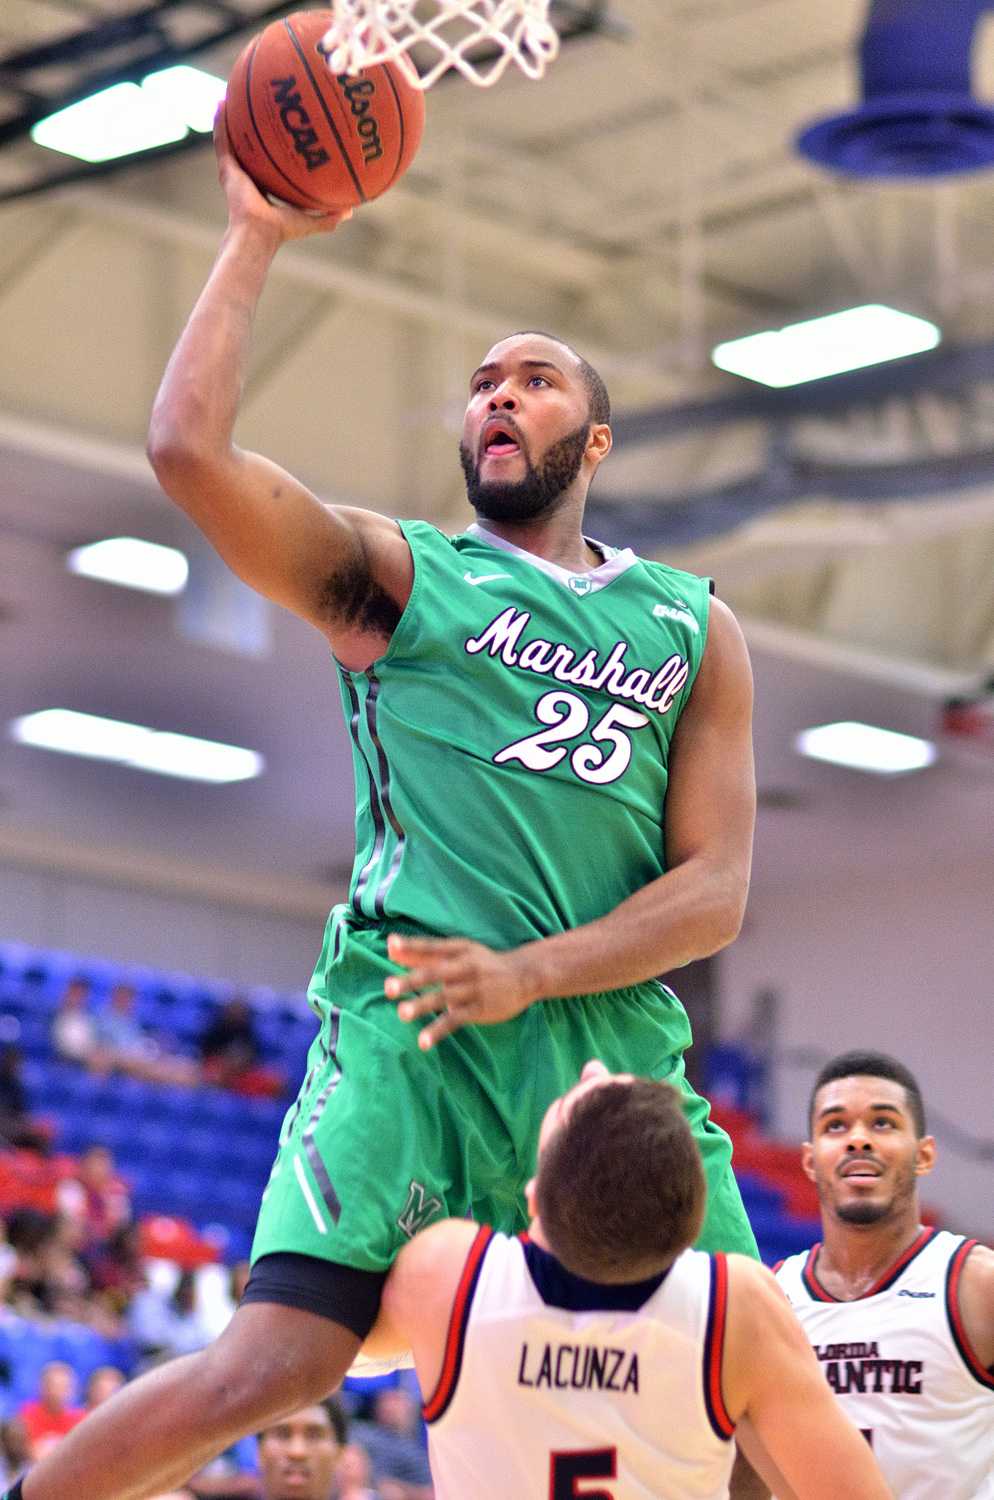 Marshall forward Ryan Taylor (25) cruises to complete a layup against FAU forward Javier Lacunza (5). Taylor led the Thundering Herd with 24 points.